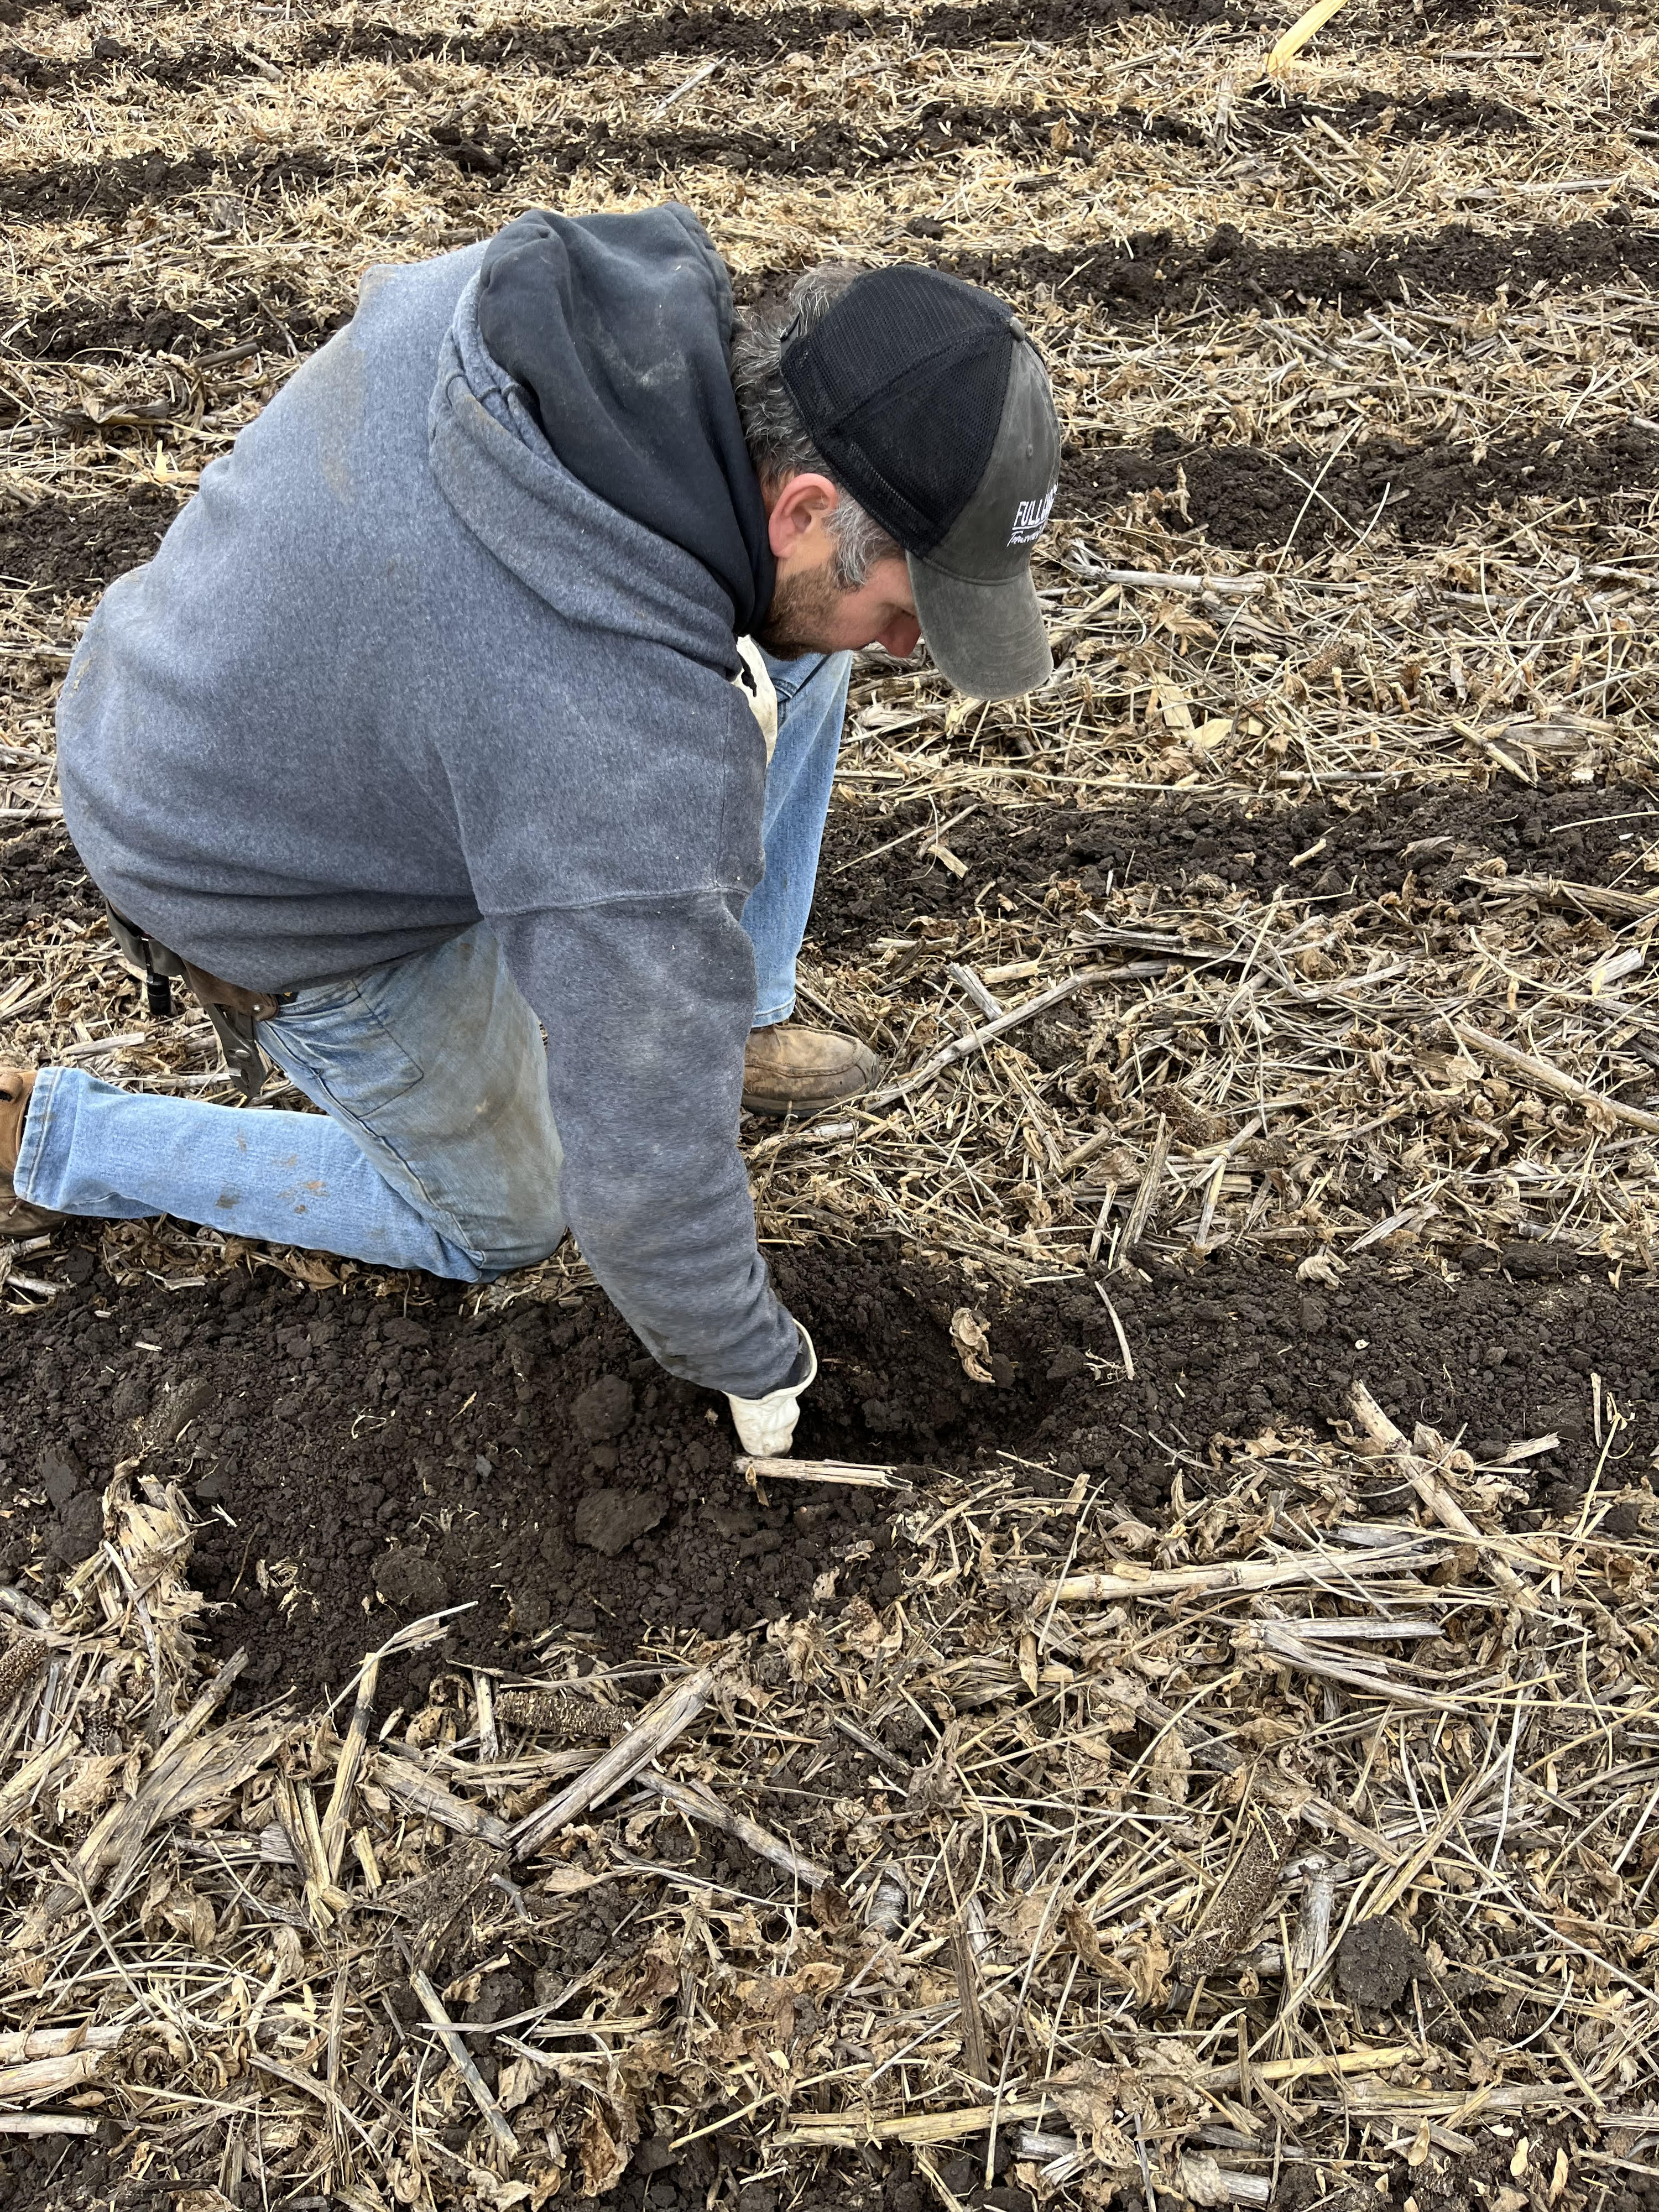 Farmers stay busy with fall tillage work before freeze up